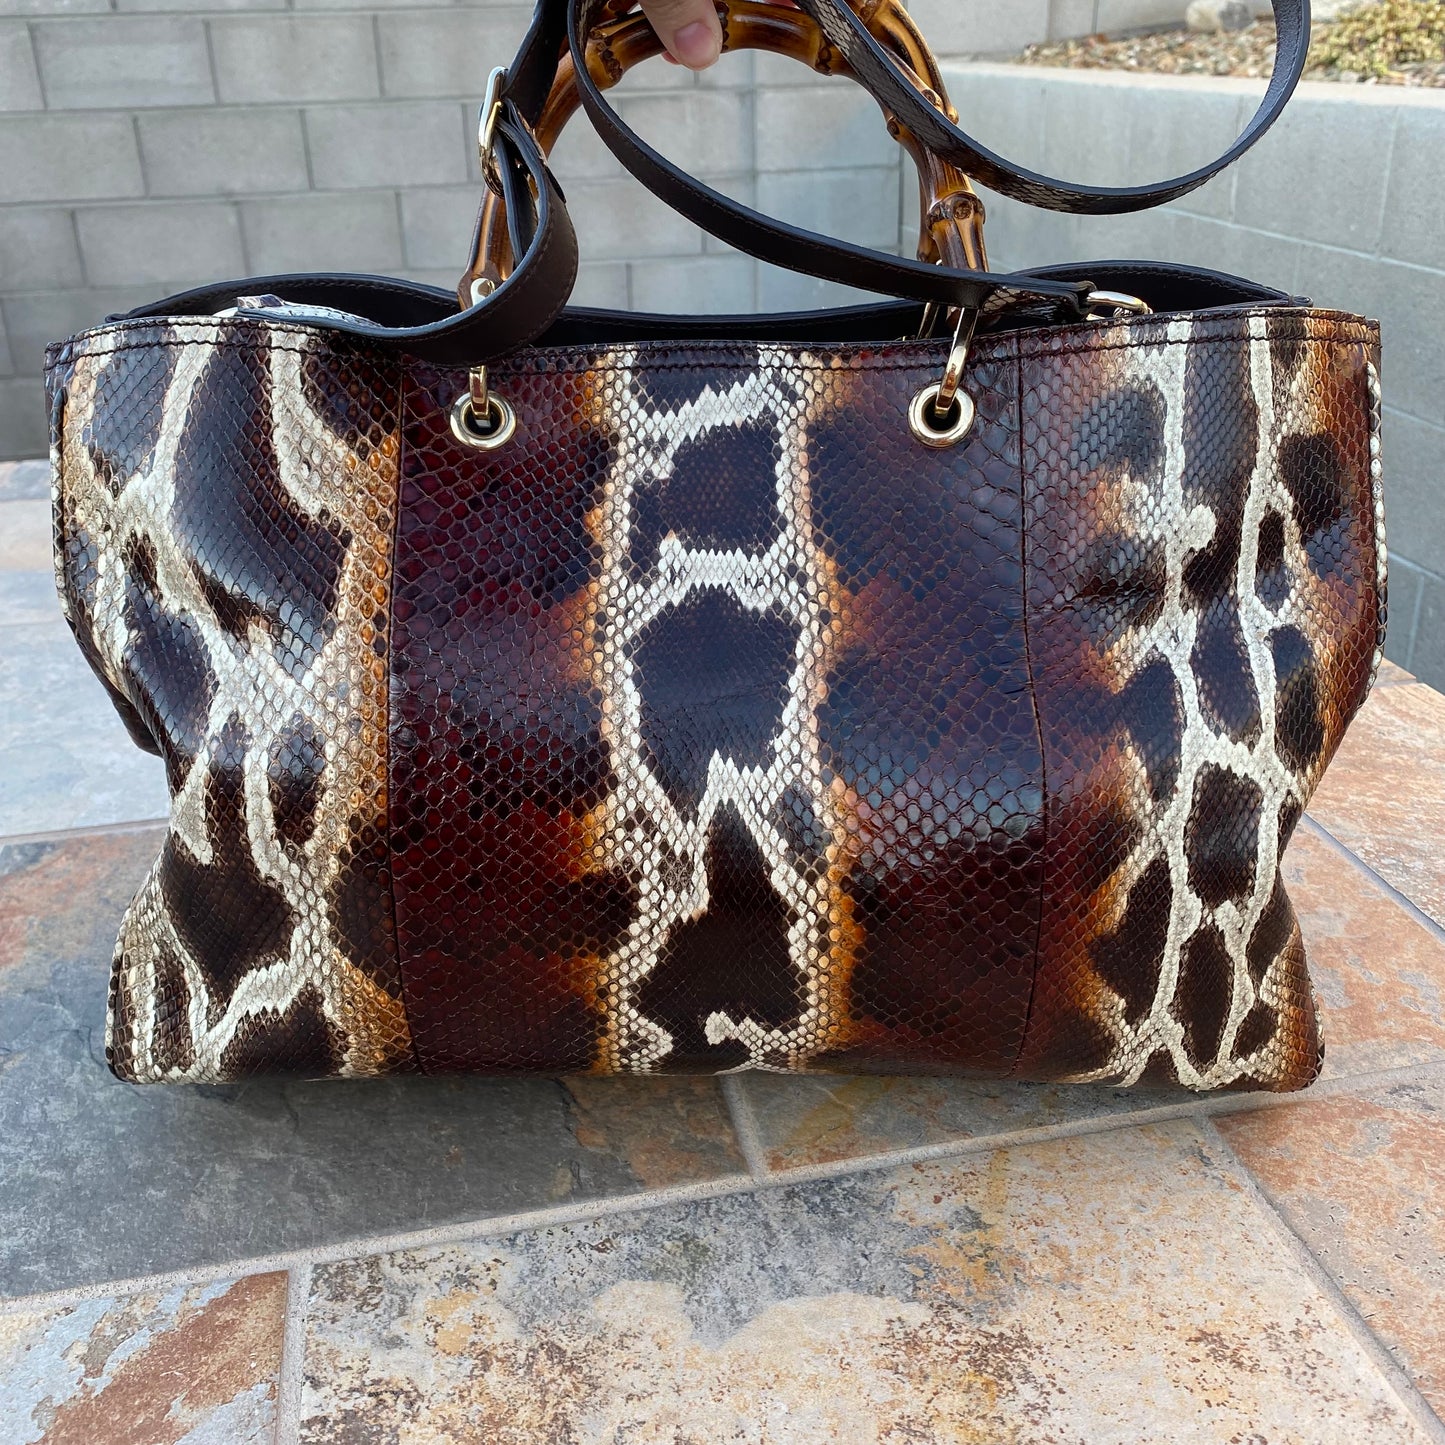 Gucci Large Bamboo Python Shopper Tote